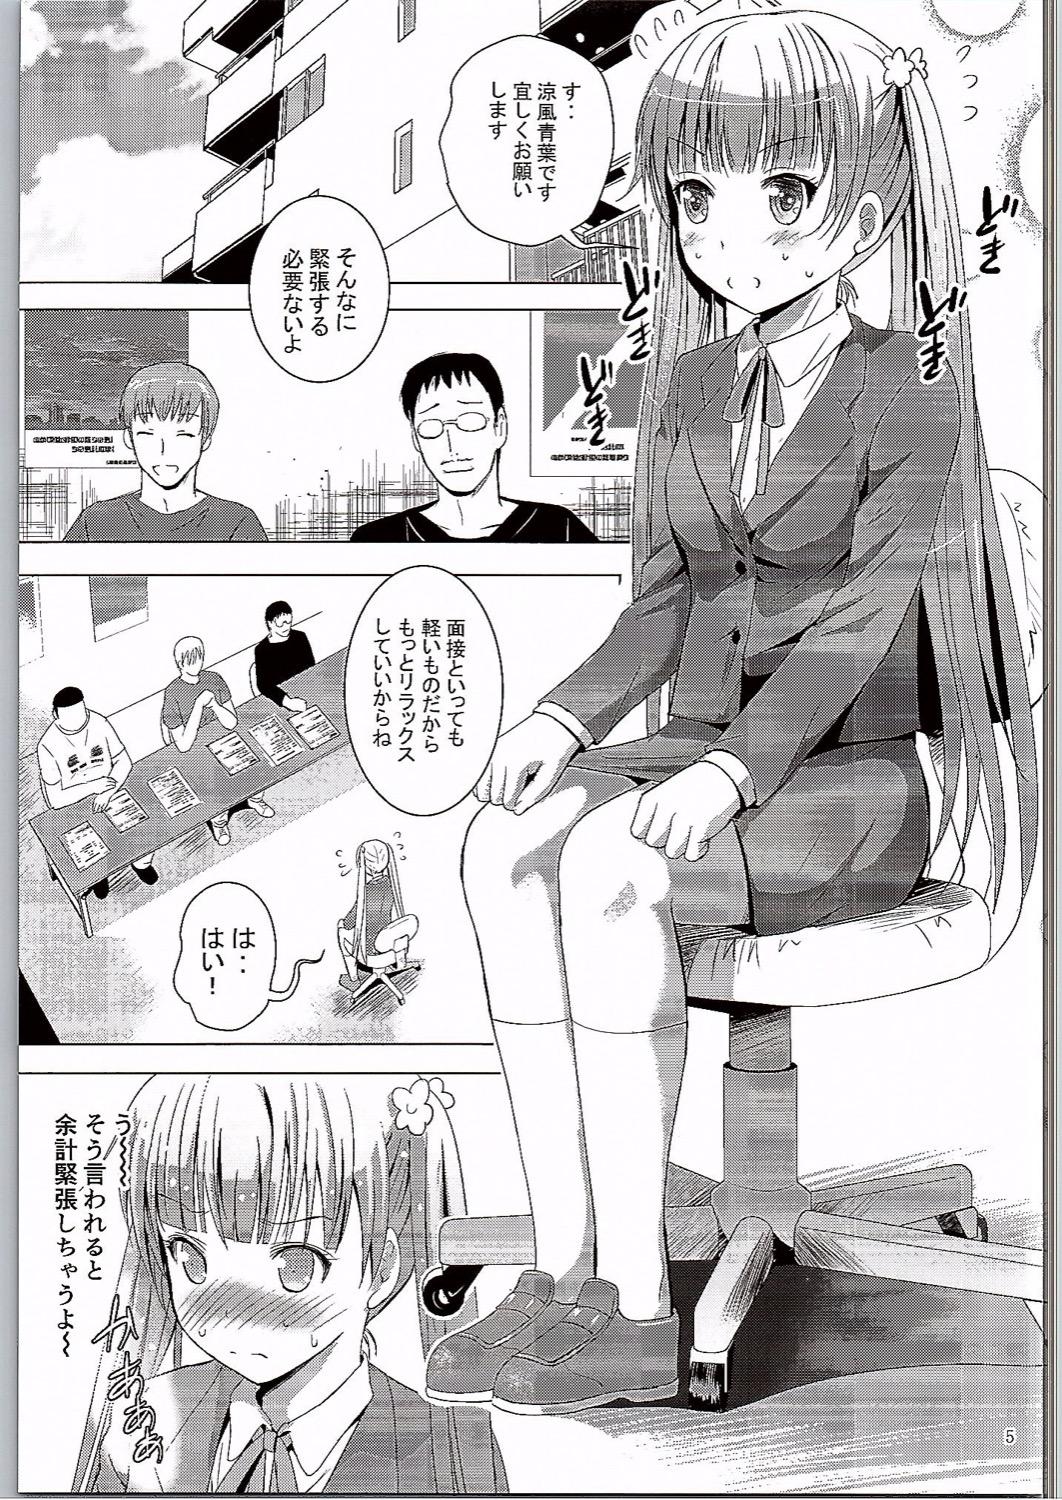 Online MOUSOU Mini Theater 38 - New game Striptease - Page 4